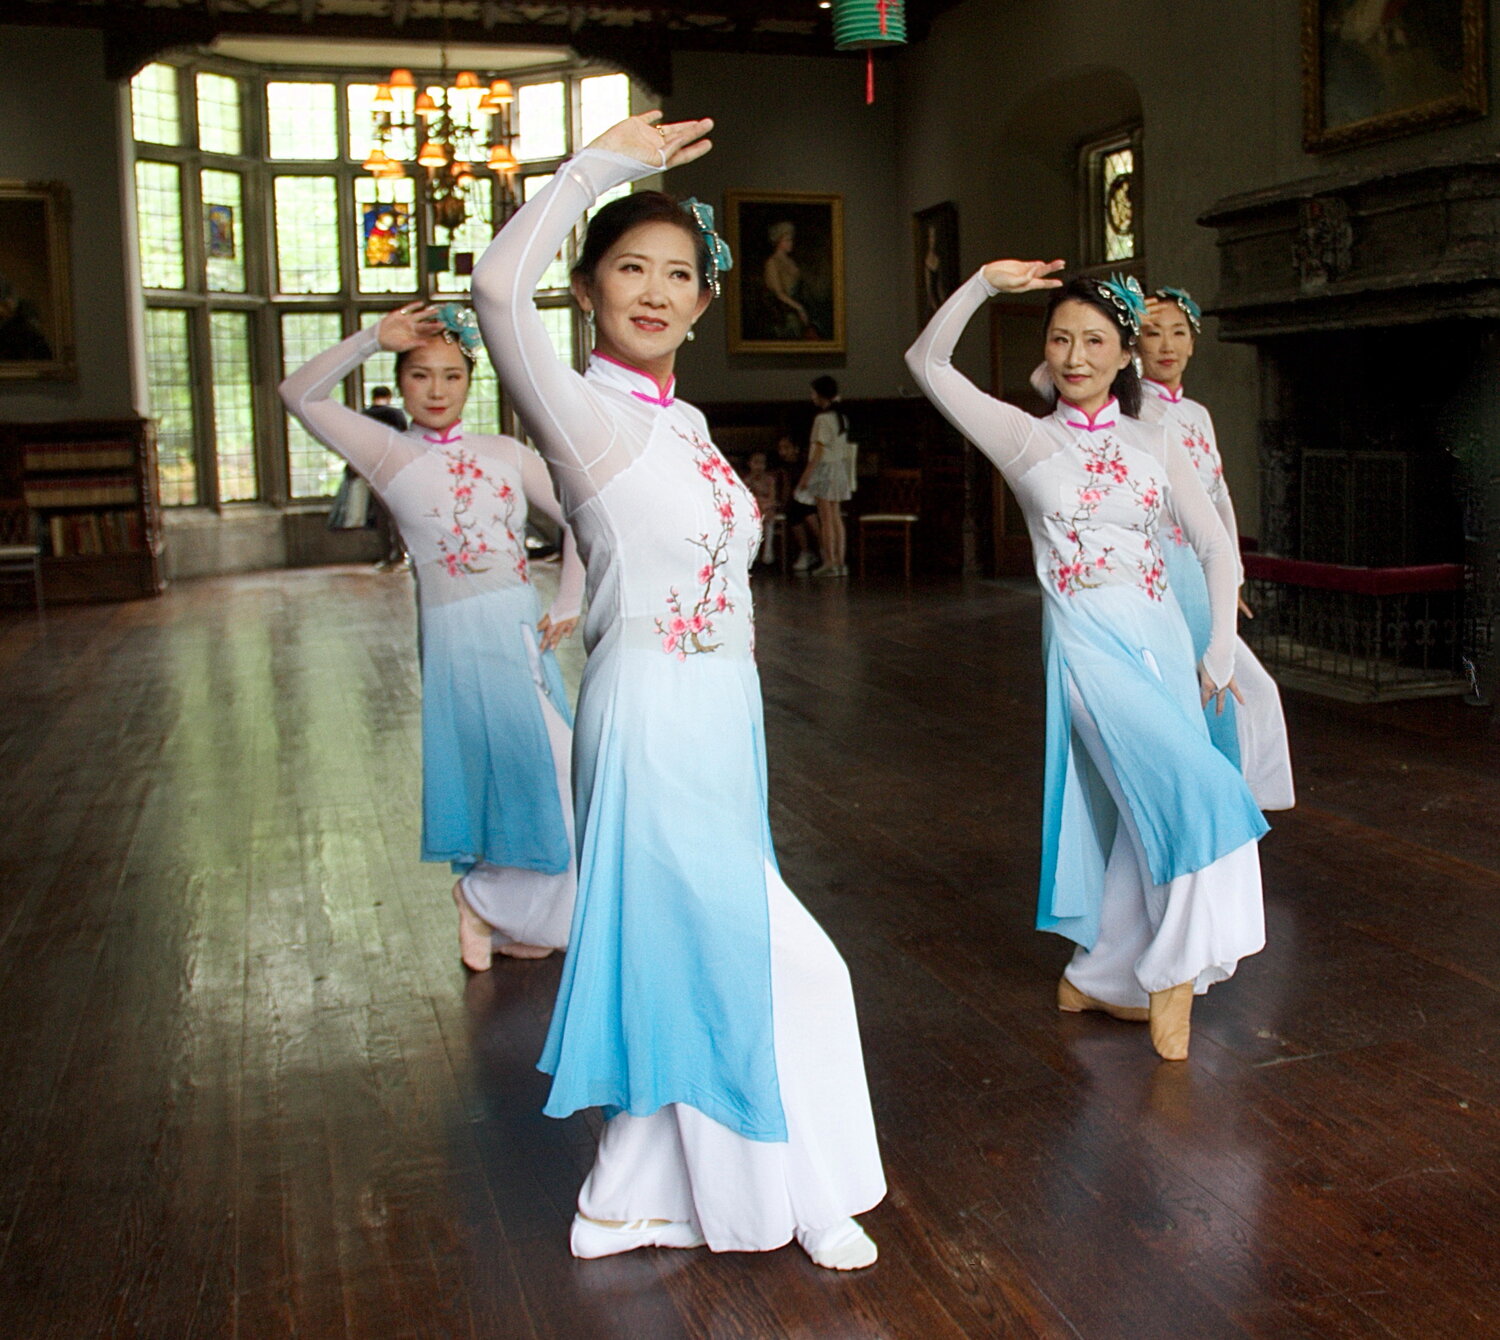 Members of the Golden Age Chinese Traditional Dance group Claire Mao, left, Sue Tang, Lily Chen and Vicky Zhang took time to rehearse before their performance.